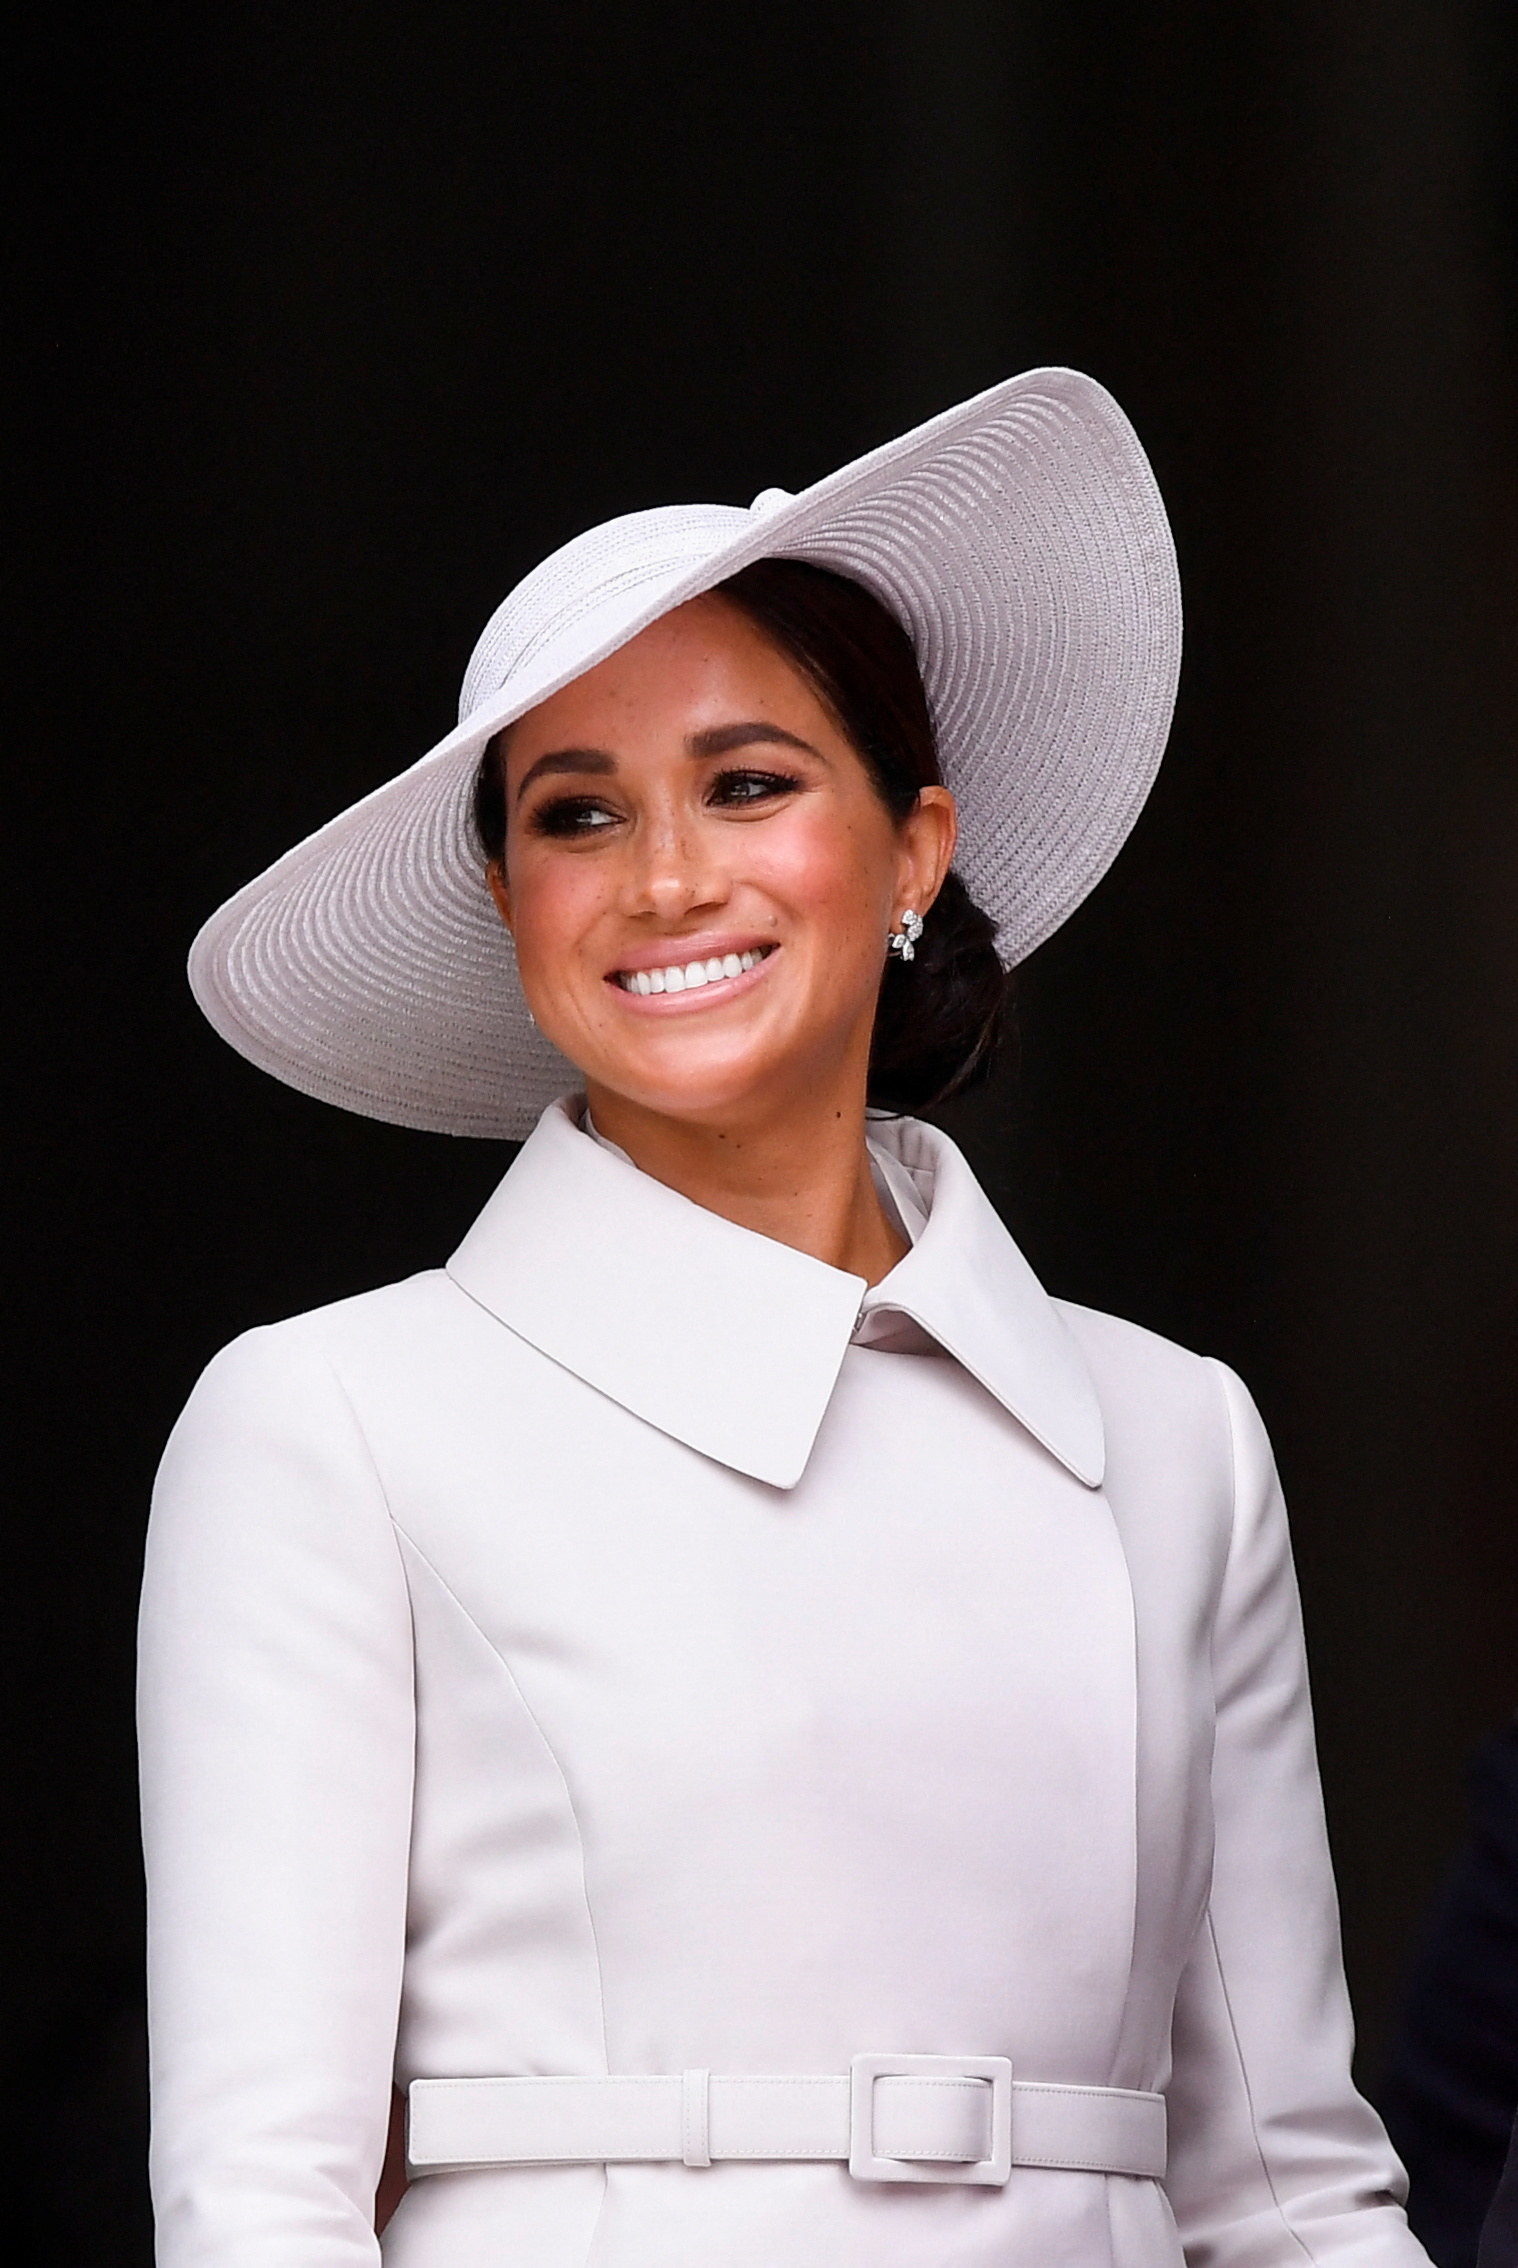 Smiling Meghan in another wide-brimmed sun hat